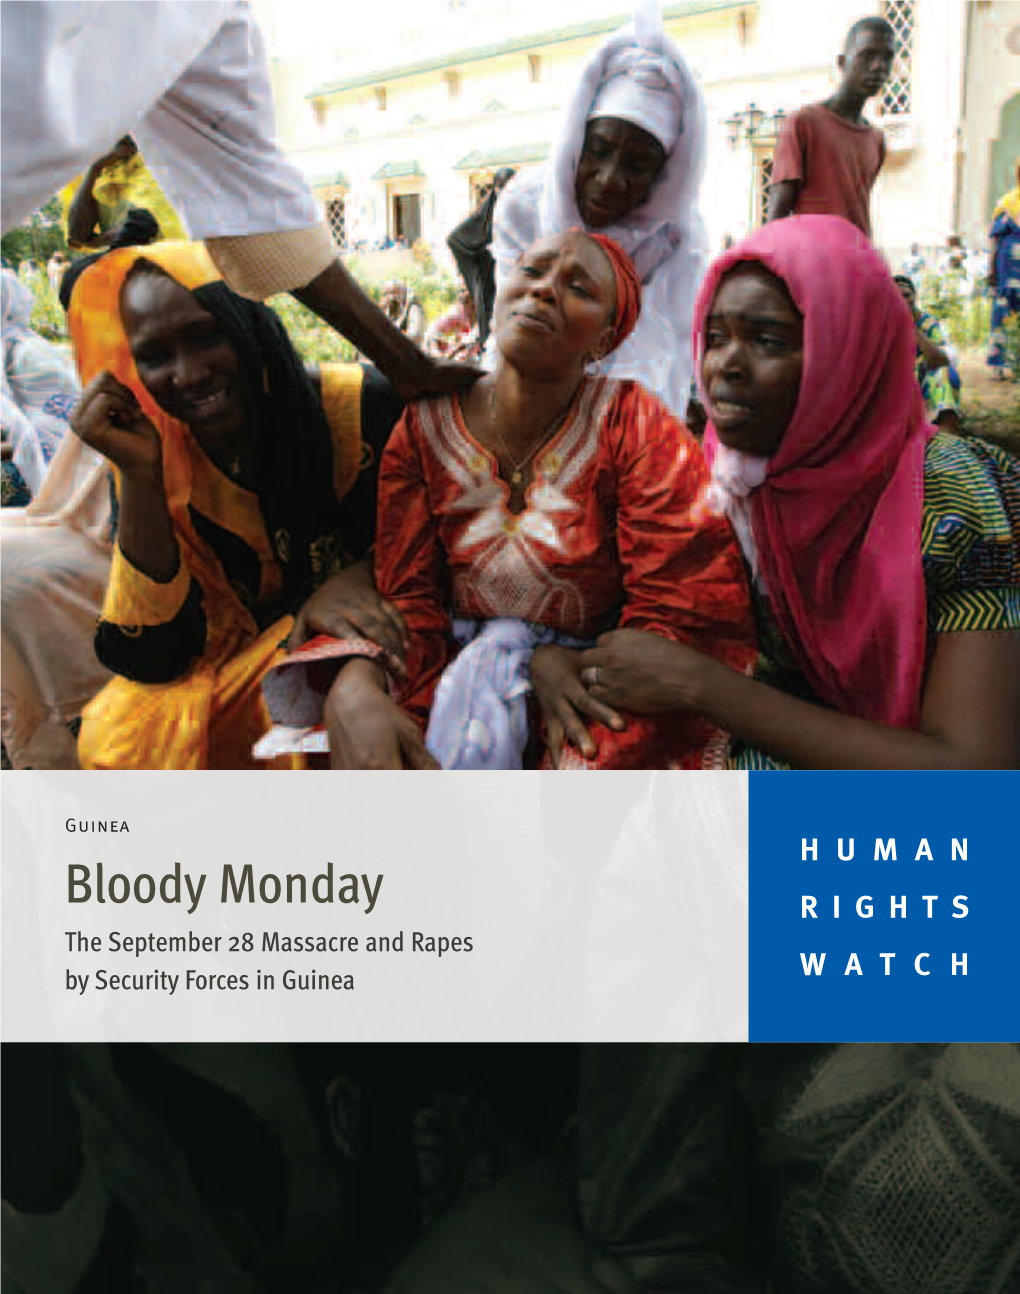 Bloody Monday RIGHTS the September 28 Massacre and Rapes by Security Forces in Guinea WATCH